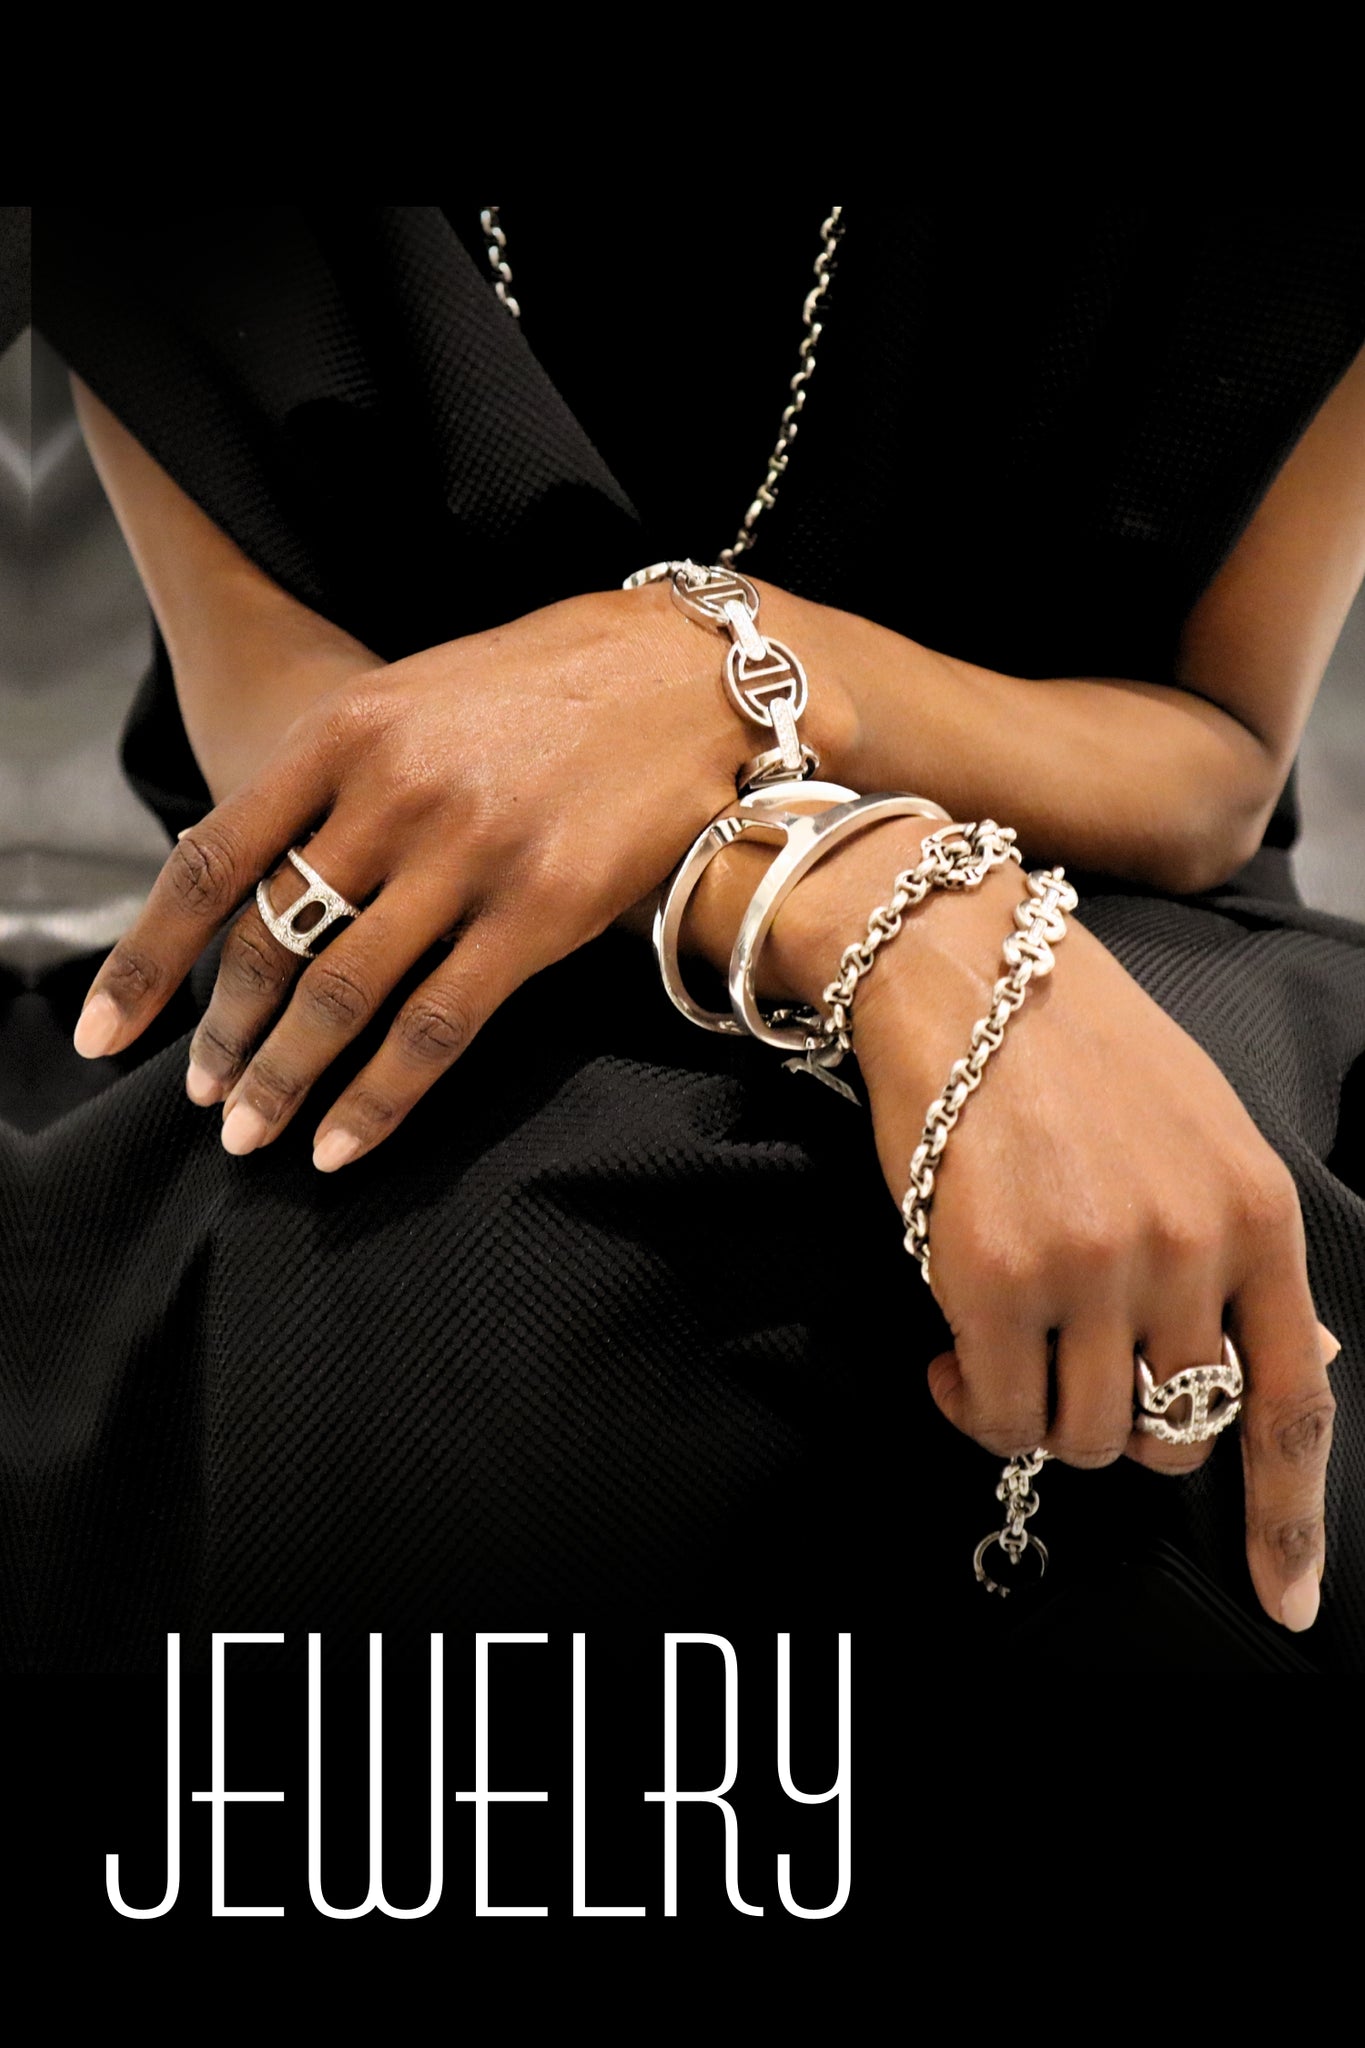 JOAN SHEPP LUXURY JEWELRY COLLECTION FEATURING STYLES FROM HOORSENBUHS, SPINELLI KILCOLLIN, ROSA MARIA, & MORE